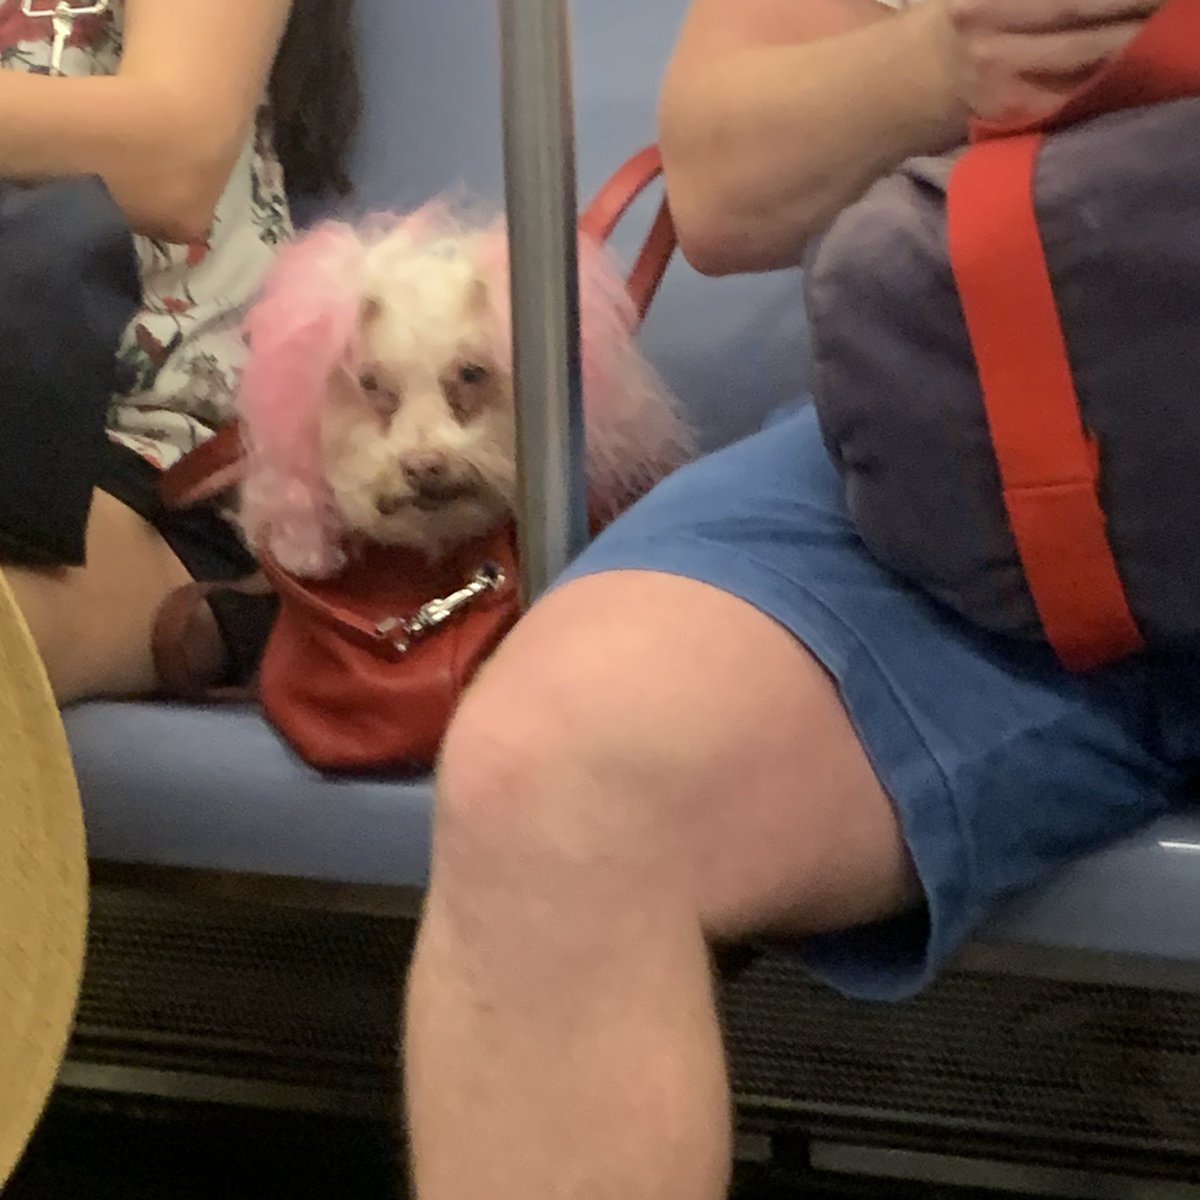 this dog genuinely made me feel fucking crazy